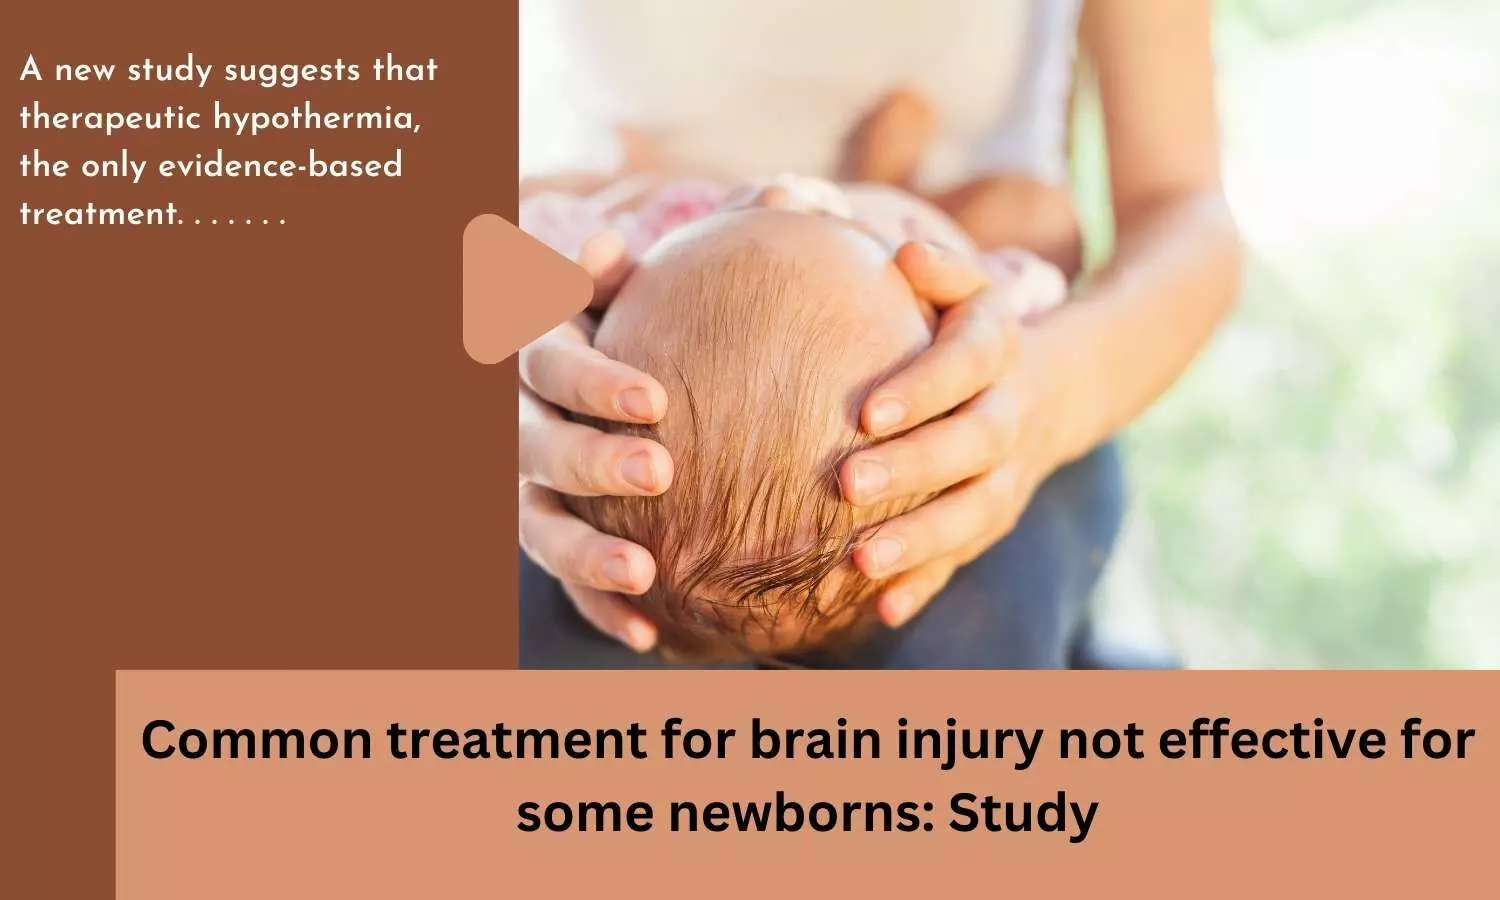 Common treatment for brain injury not effective for some newborns: Study